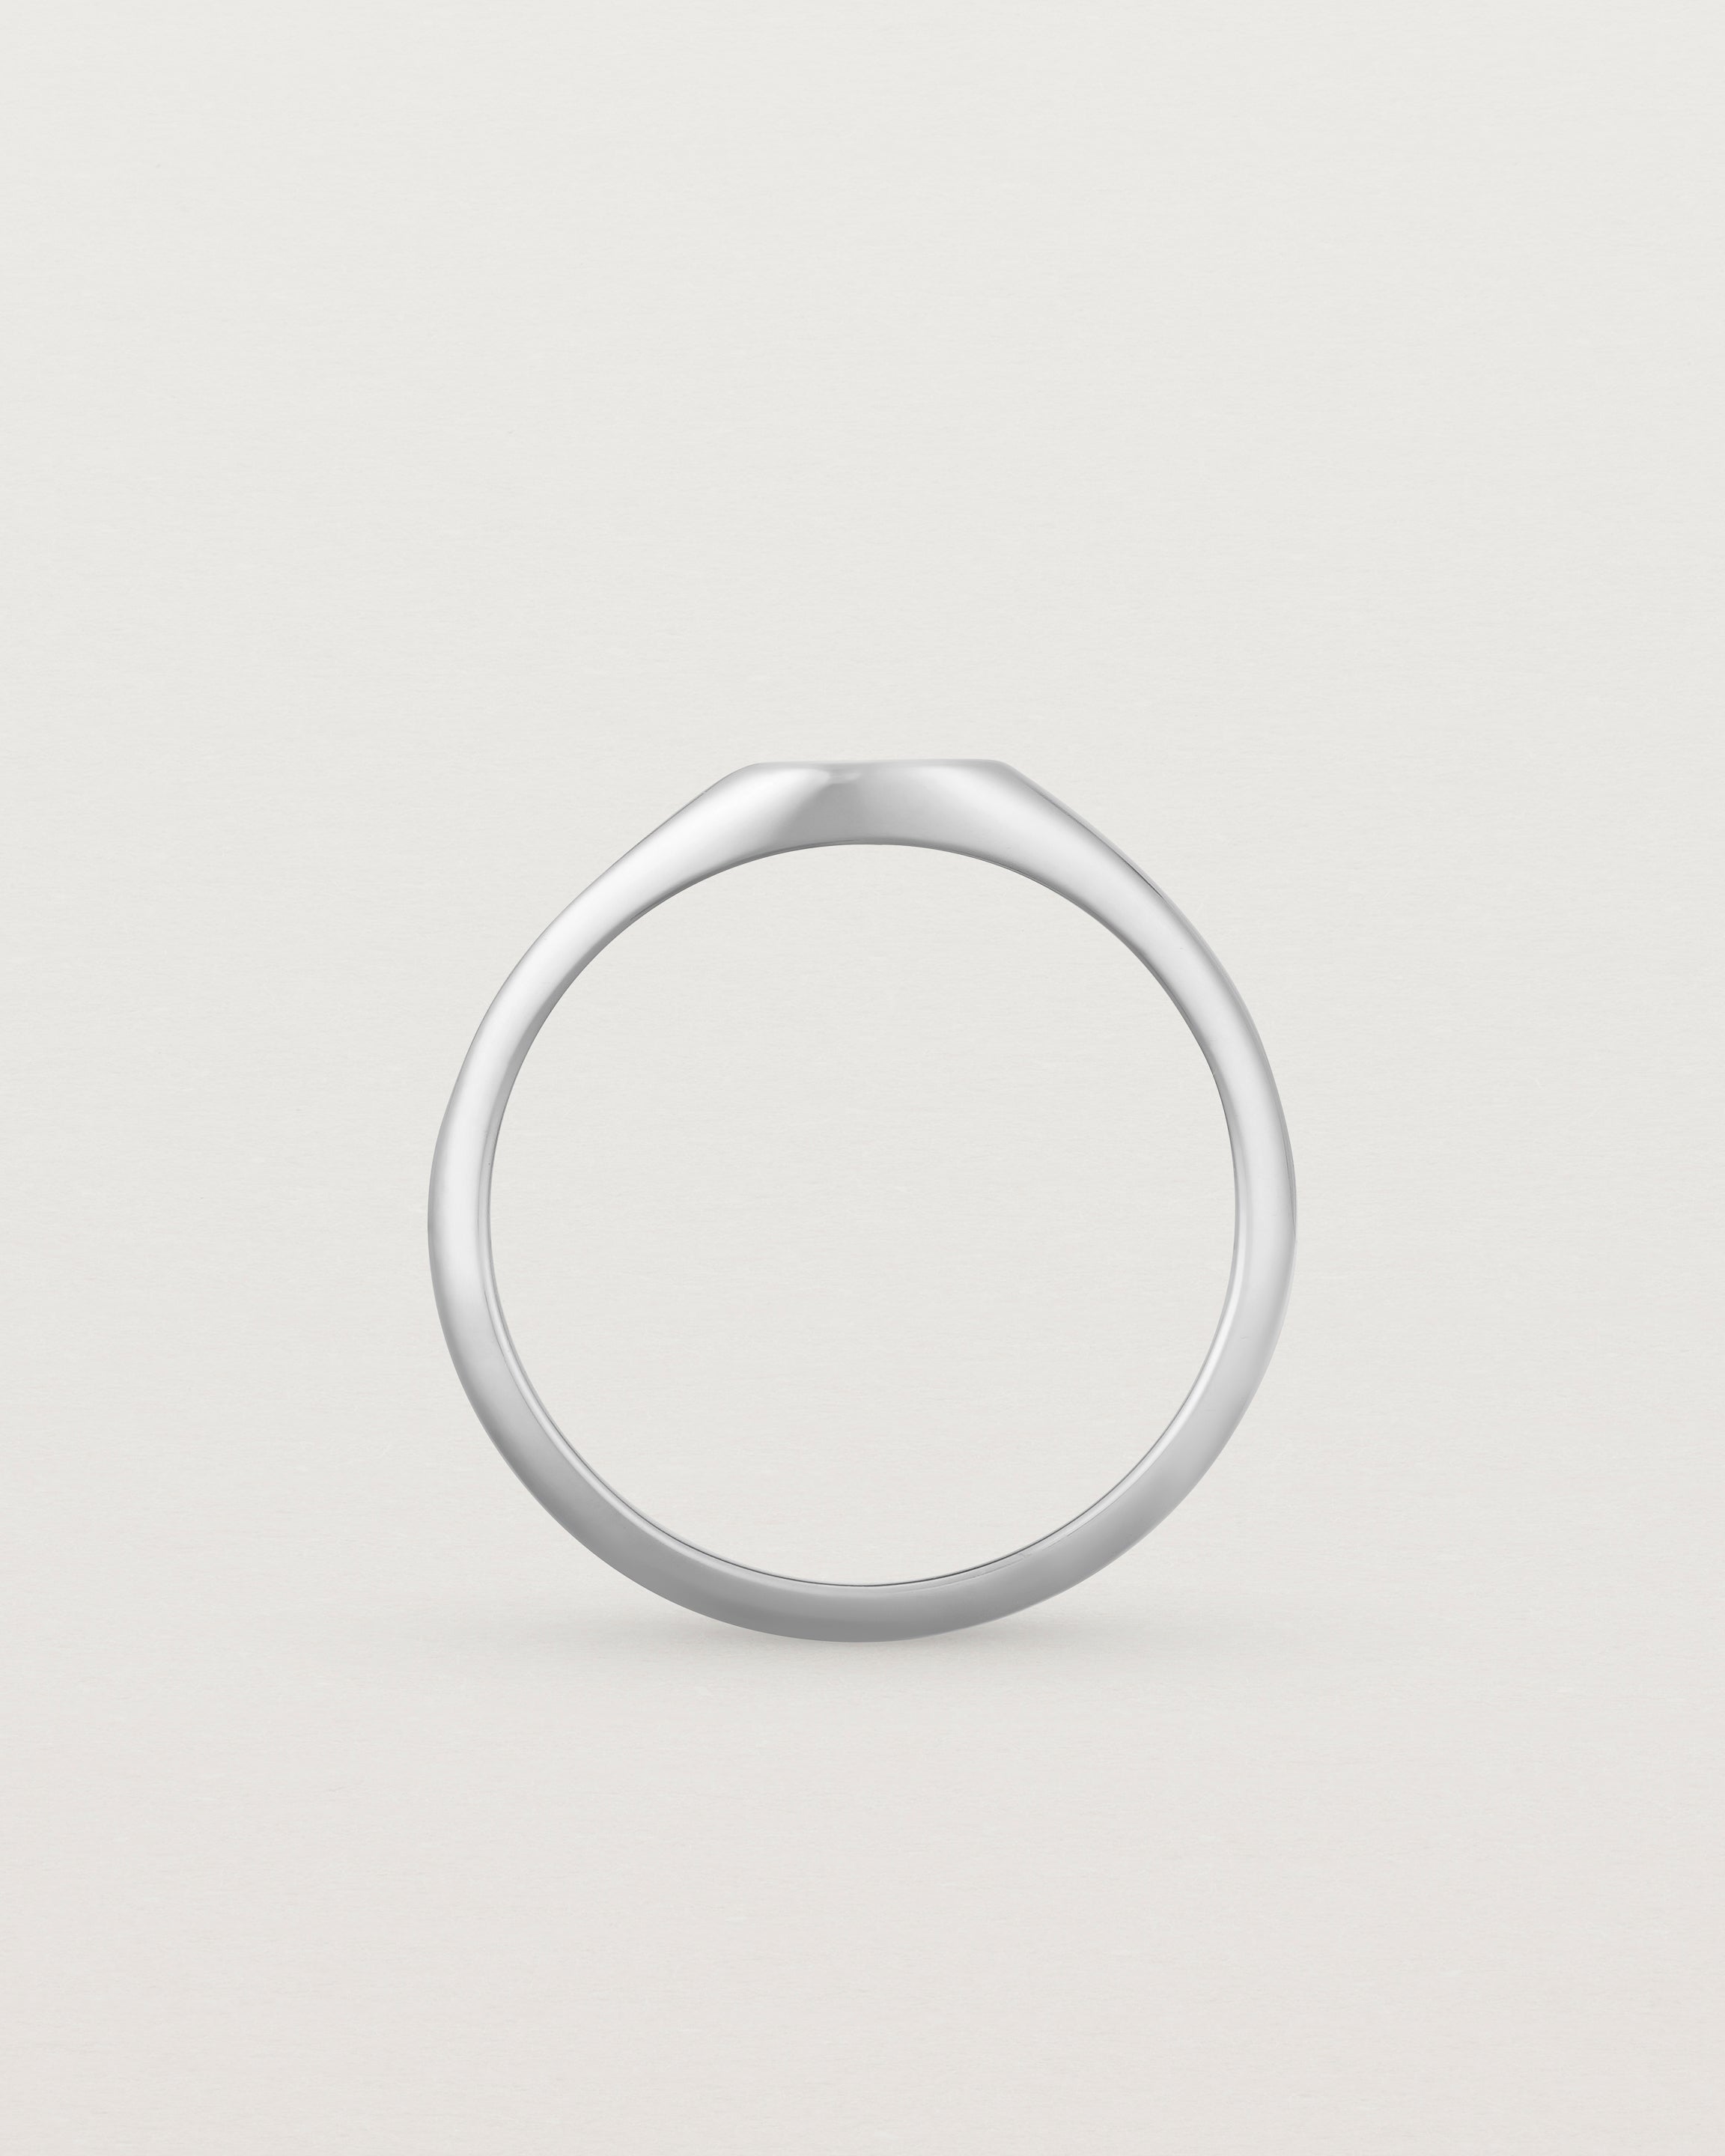 Standing view of a simple signet with an elongated rectangular face in white gold